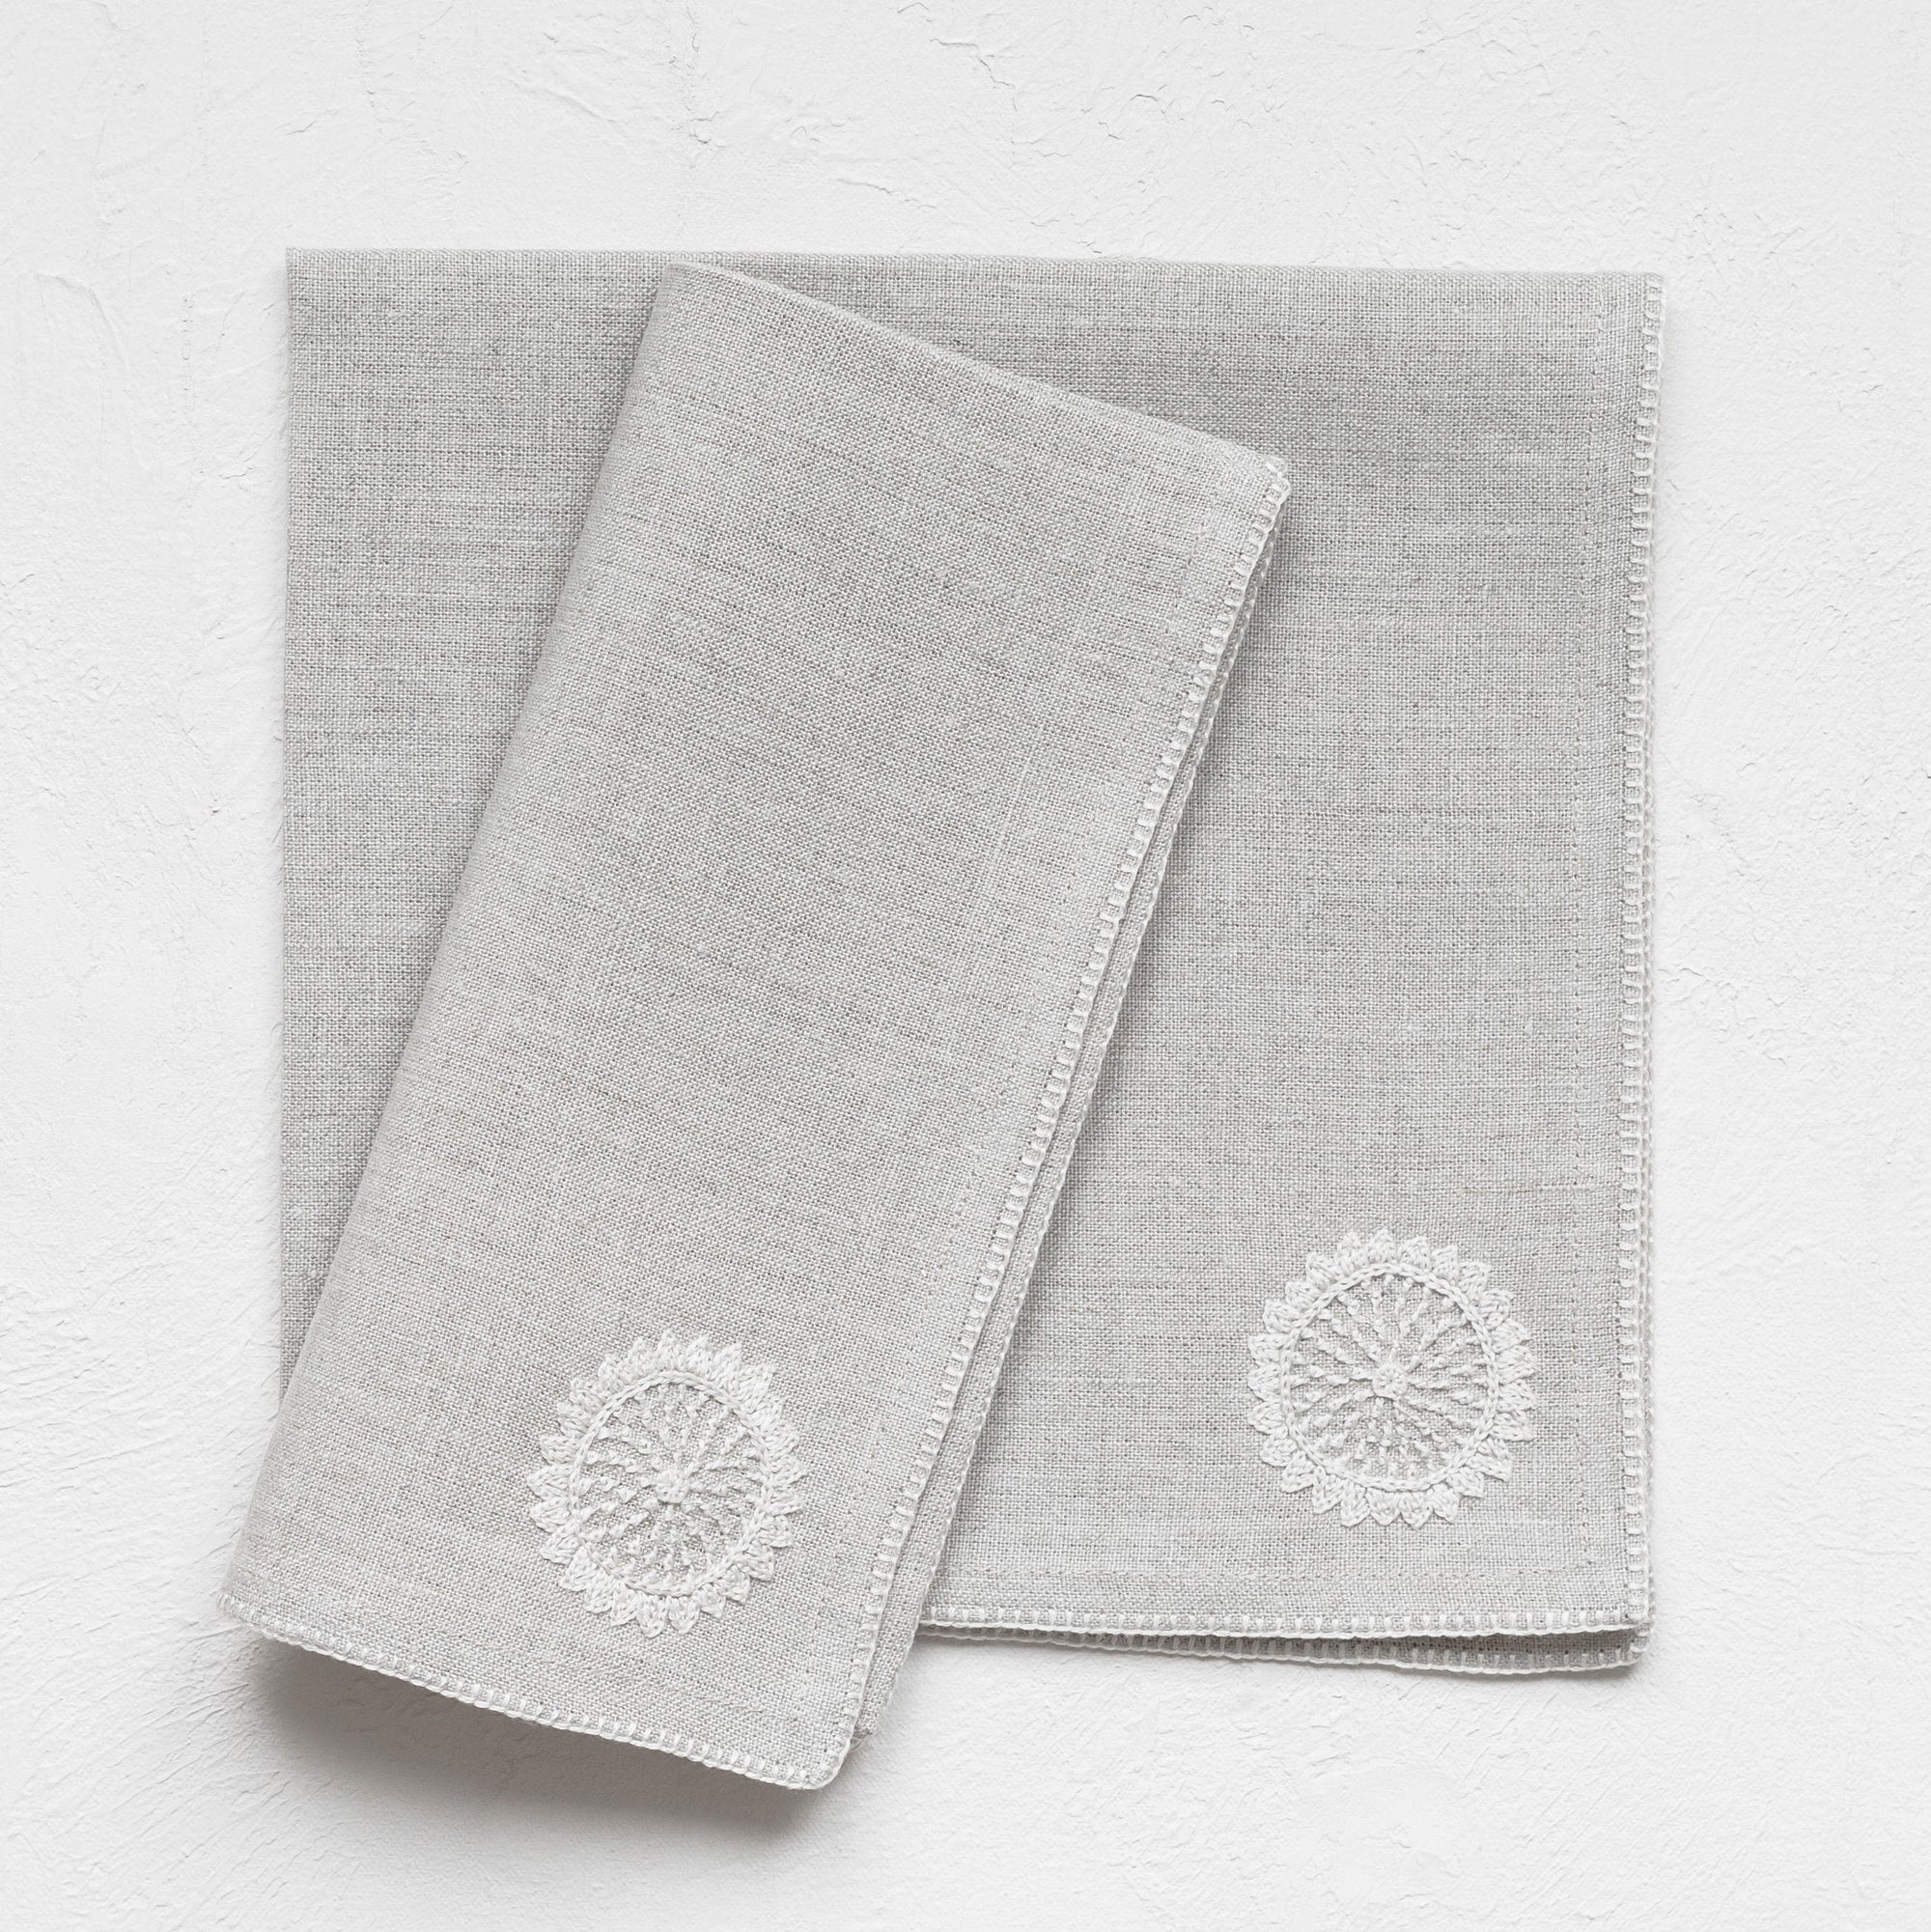 Beige linen napkins with Surya sun design from Artha Collections